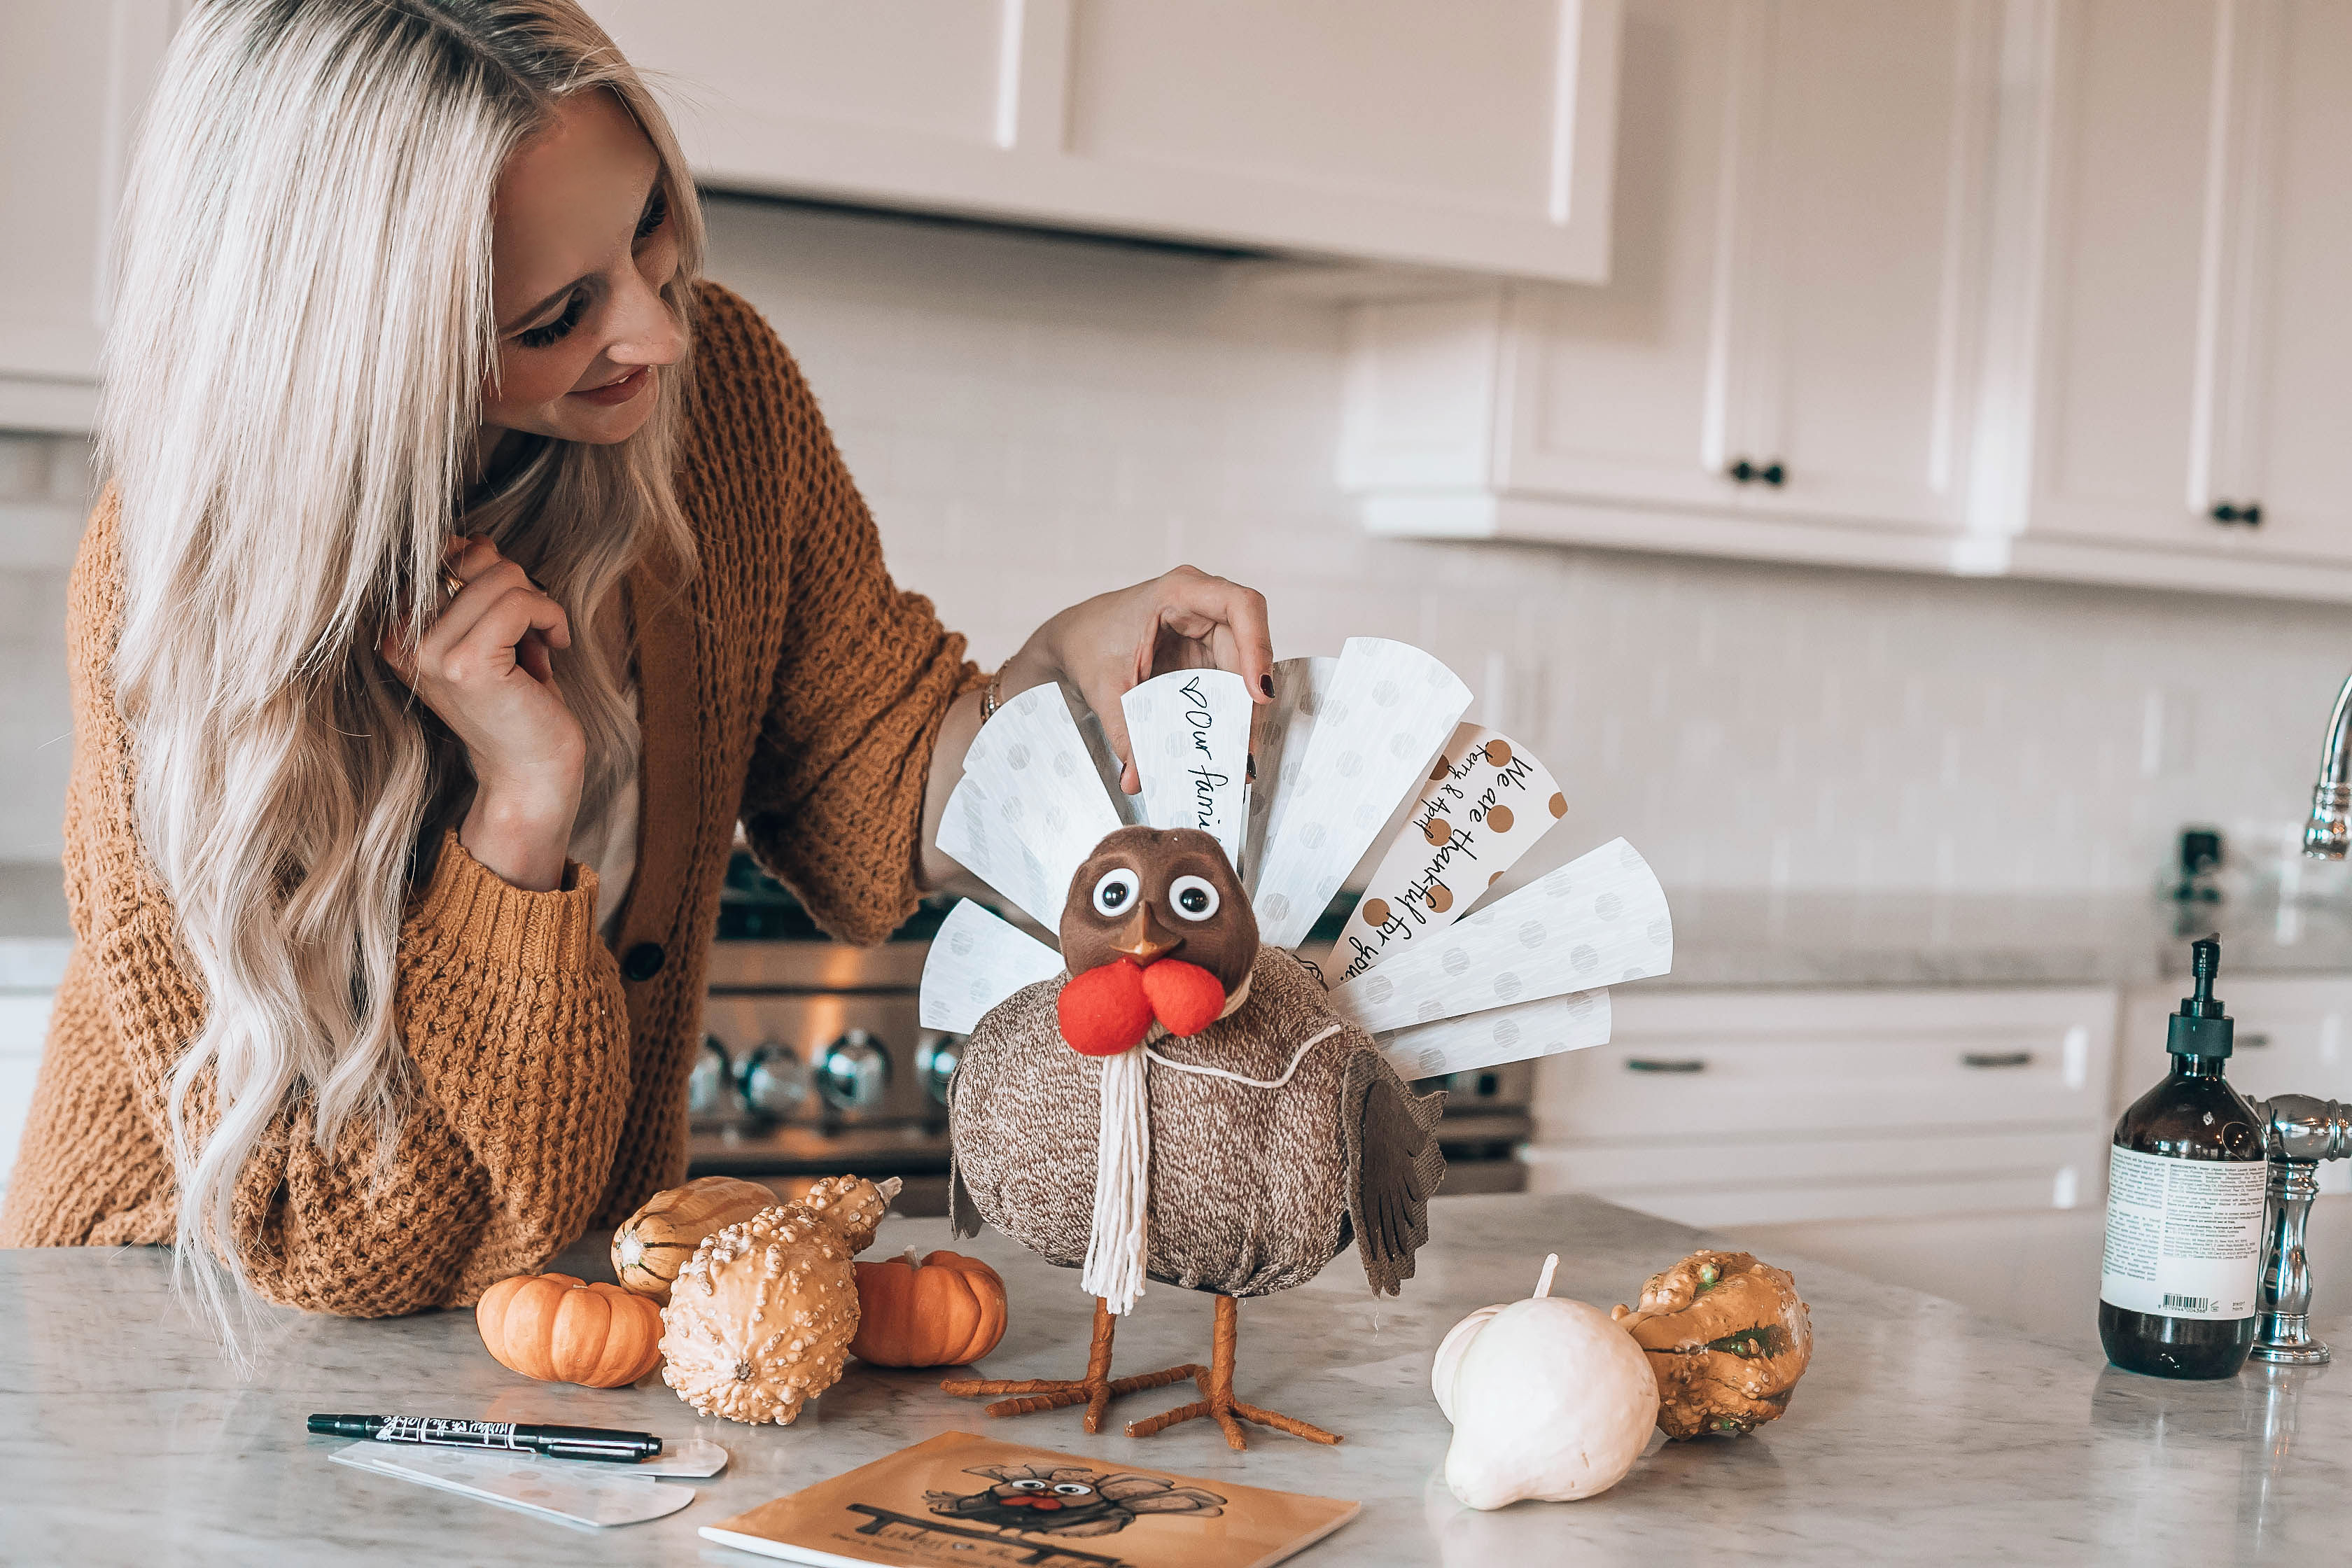 Emily Farren Wieczorek of Two Peas in a Prada talks about her new Thanksgiving tradition - Turkey on the Table - it teaches gratitude and gives meals to those in need.